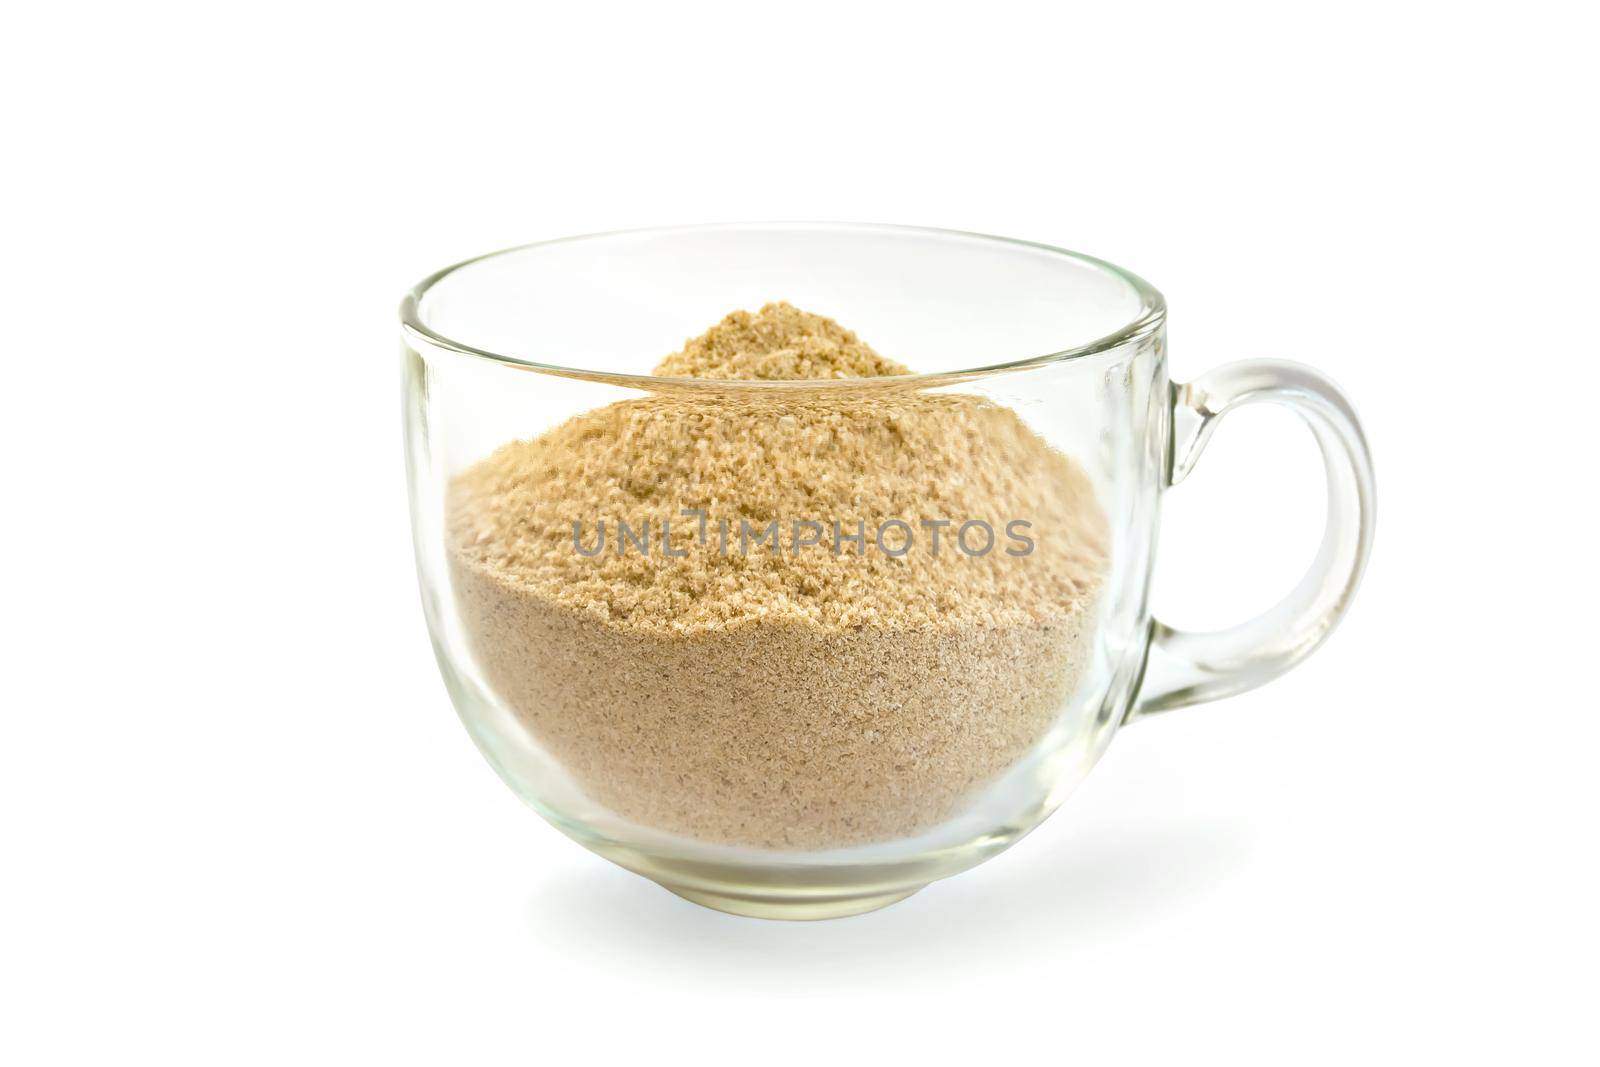 Flour sesame, cedar or oatmeal in a glass cup isolated on white background